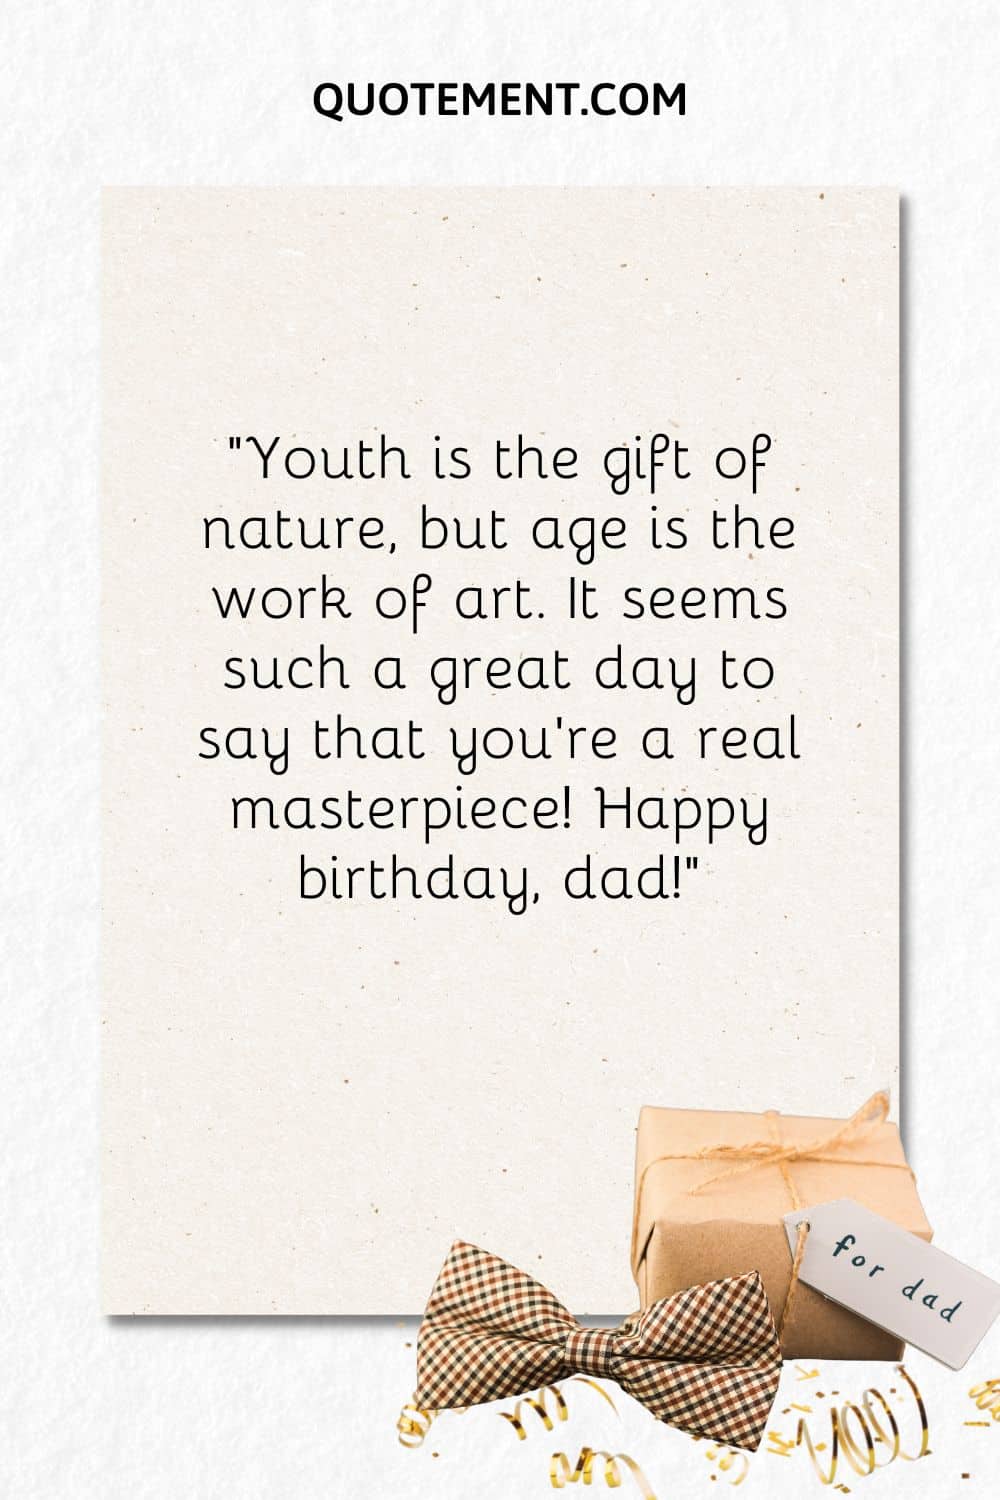 “Youth is the gift of nature, but age is the work of art. It seems such a great day to say that you’re a real masterpiece! Happy birthday, dad!”